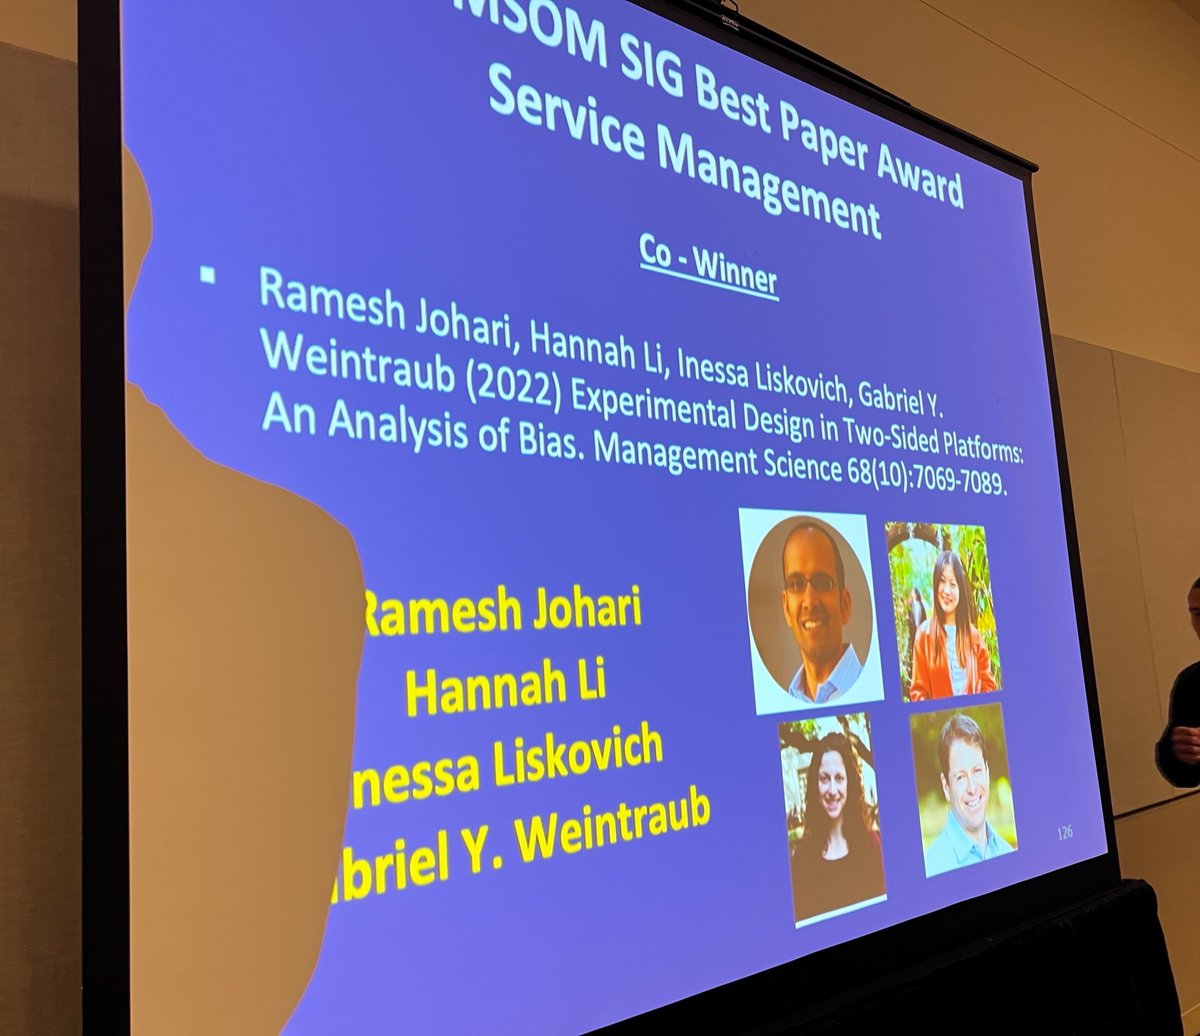 Honored to have my work on marketplace experimentation recognized by the Dantzig Dissertation Award and the MSOM Service Management SIG best paper award at #INFORMS2023 last week!